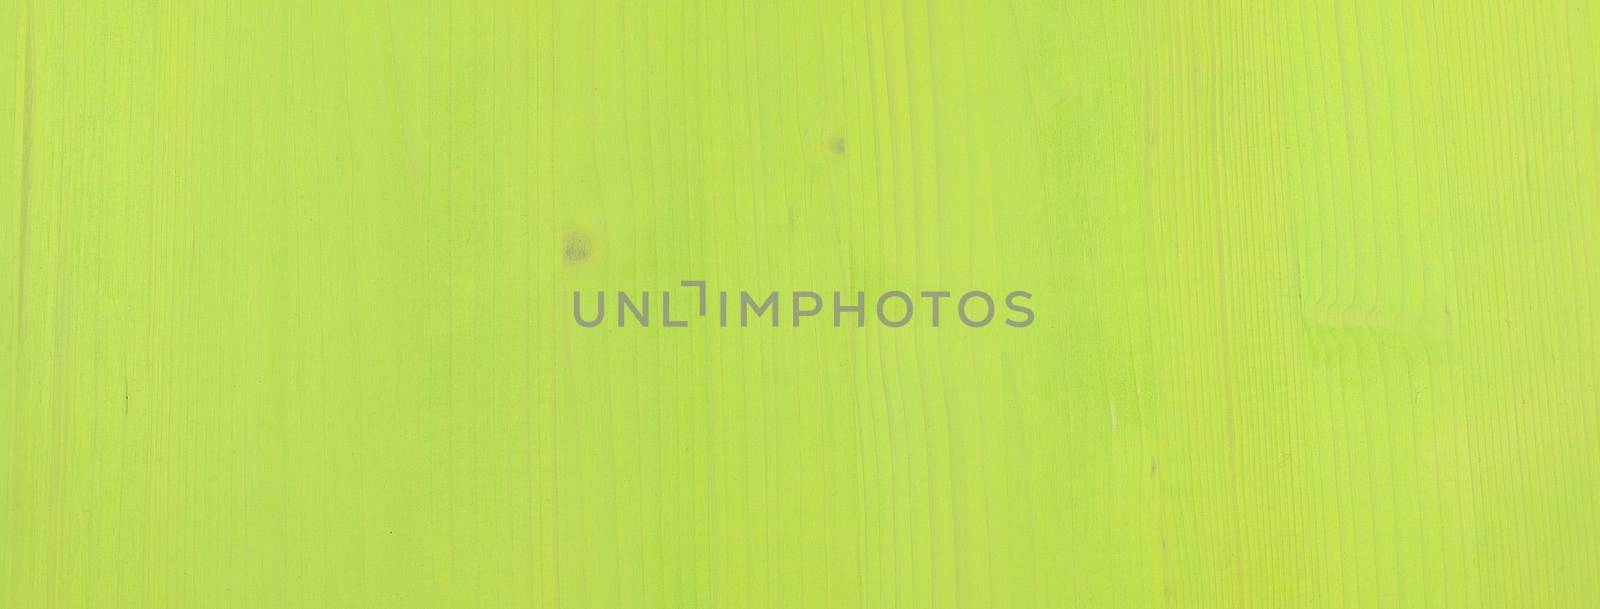 Texture of a green wooden board by marcorubino